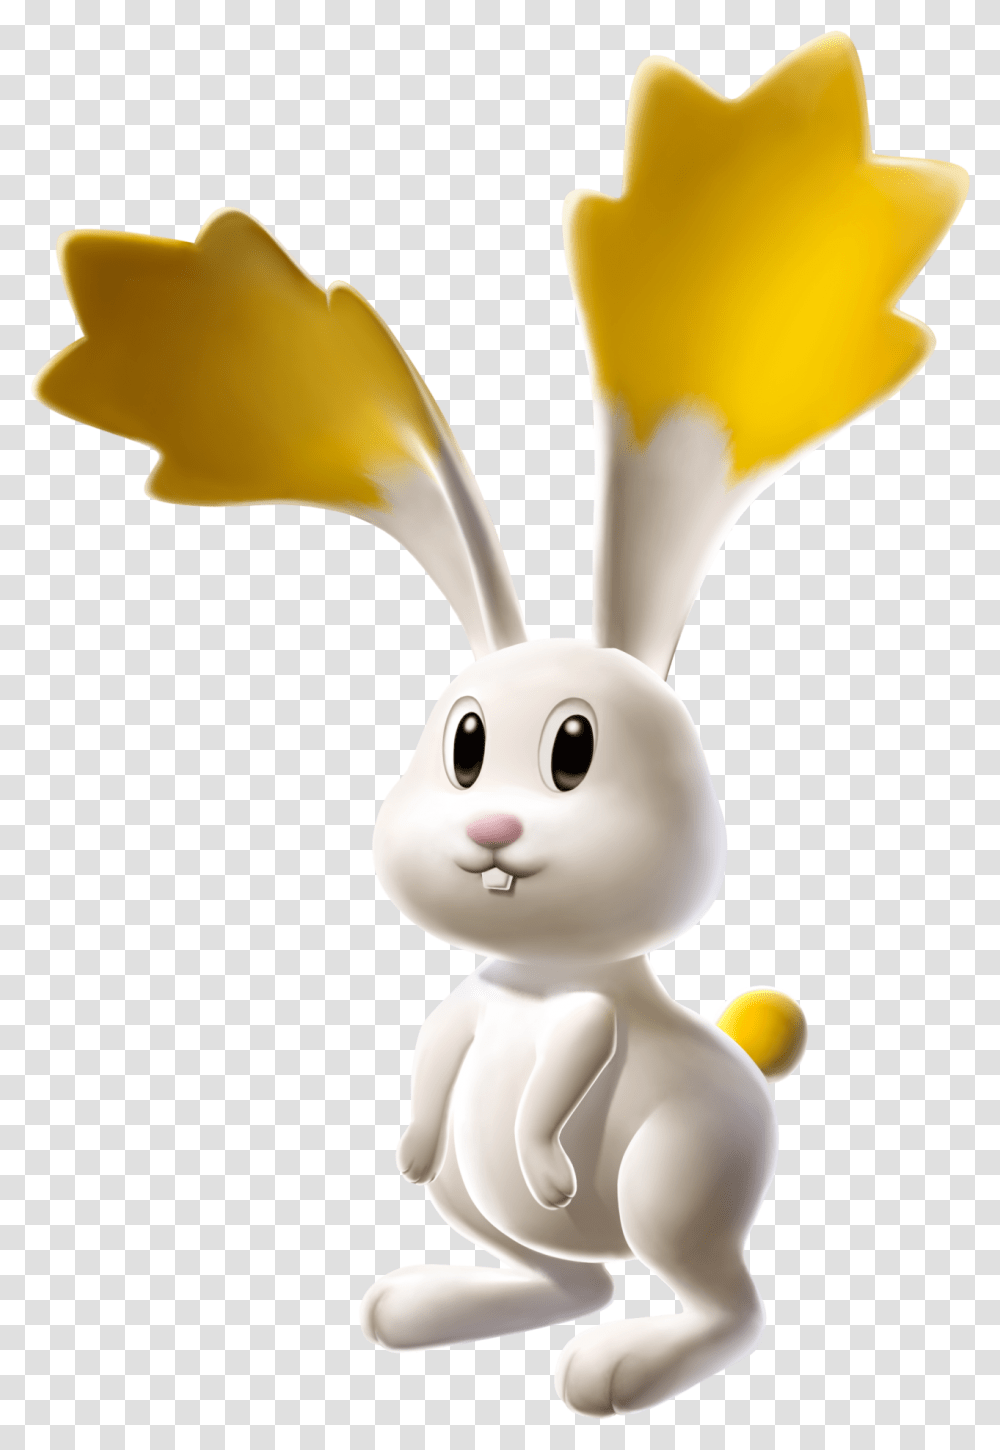 Nintendo Cafe - Mips The Rabbit As Seen In Super Mario Super Mario Galaxy Star Bunny, Toy, Animal, Wasp, Bee Transparent Png